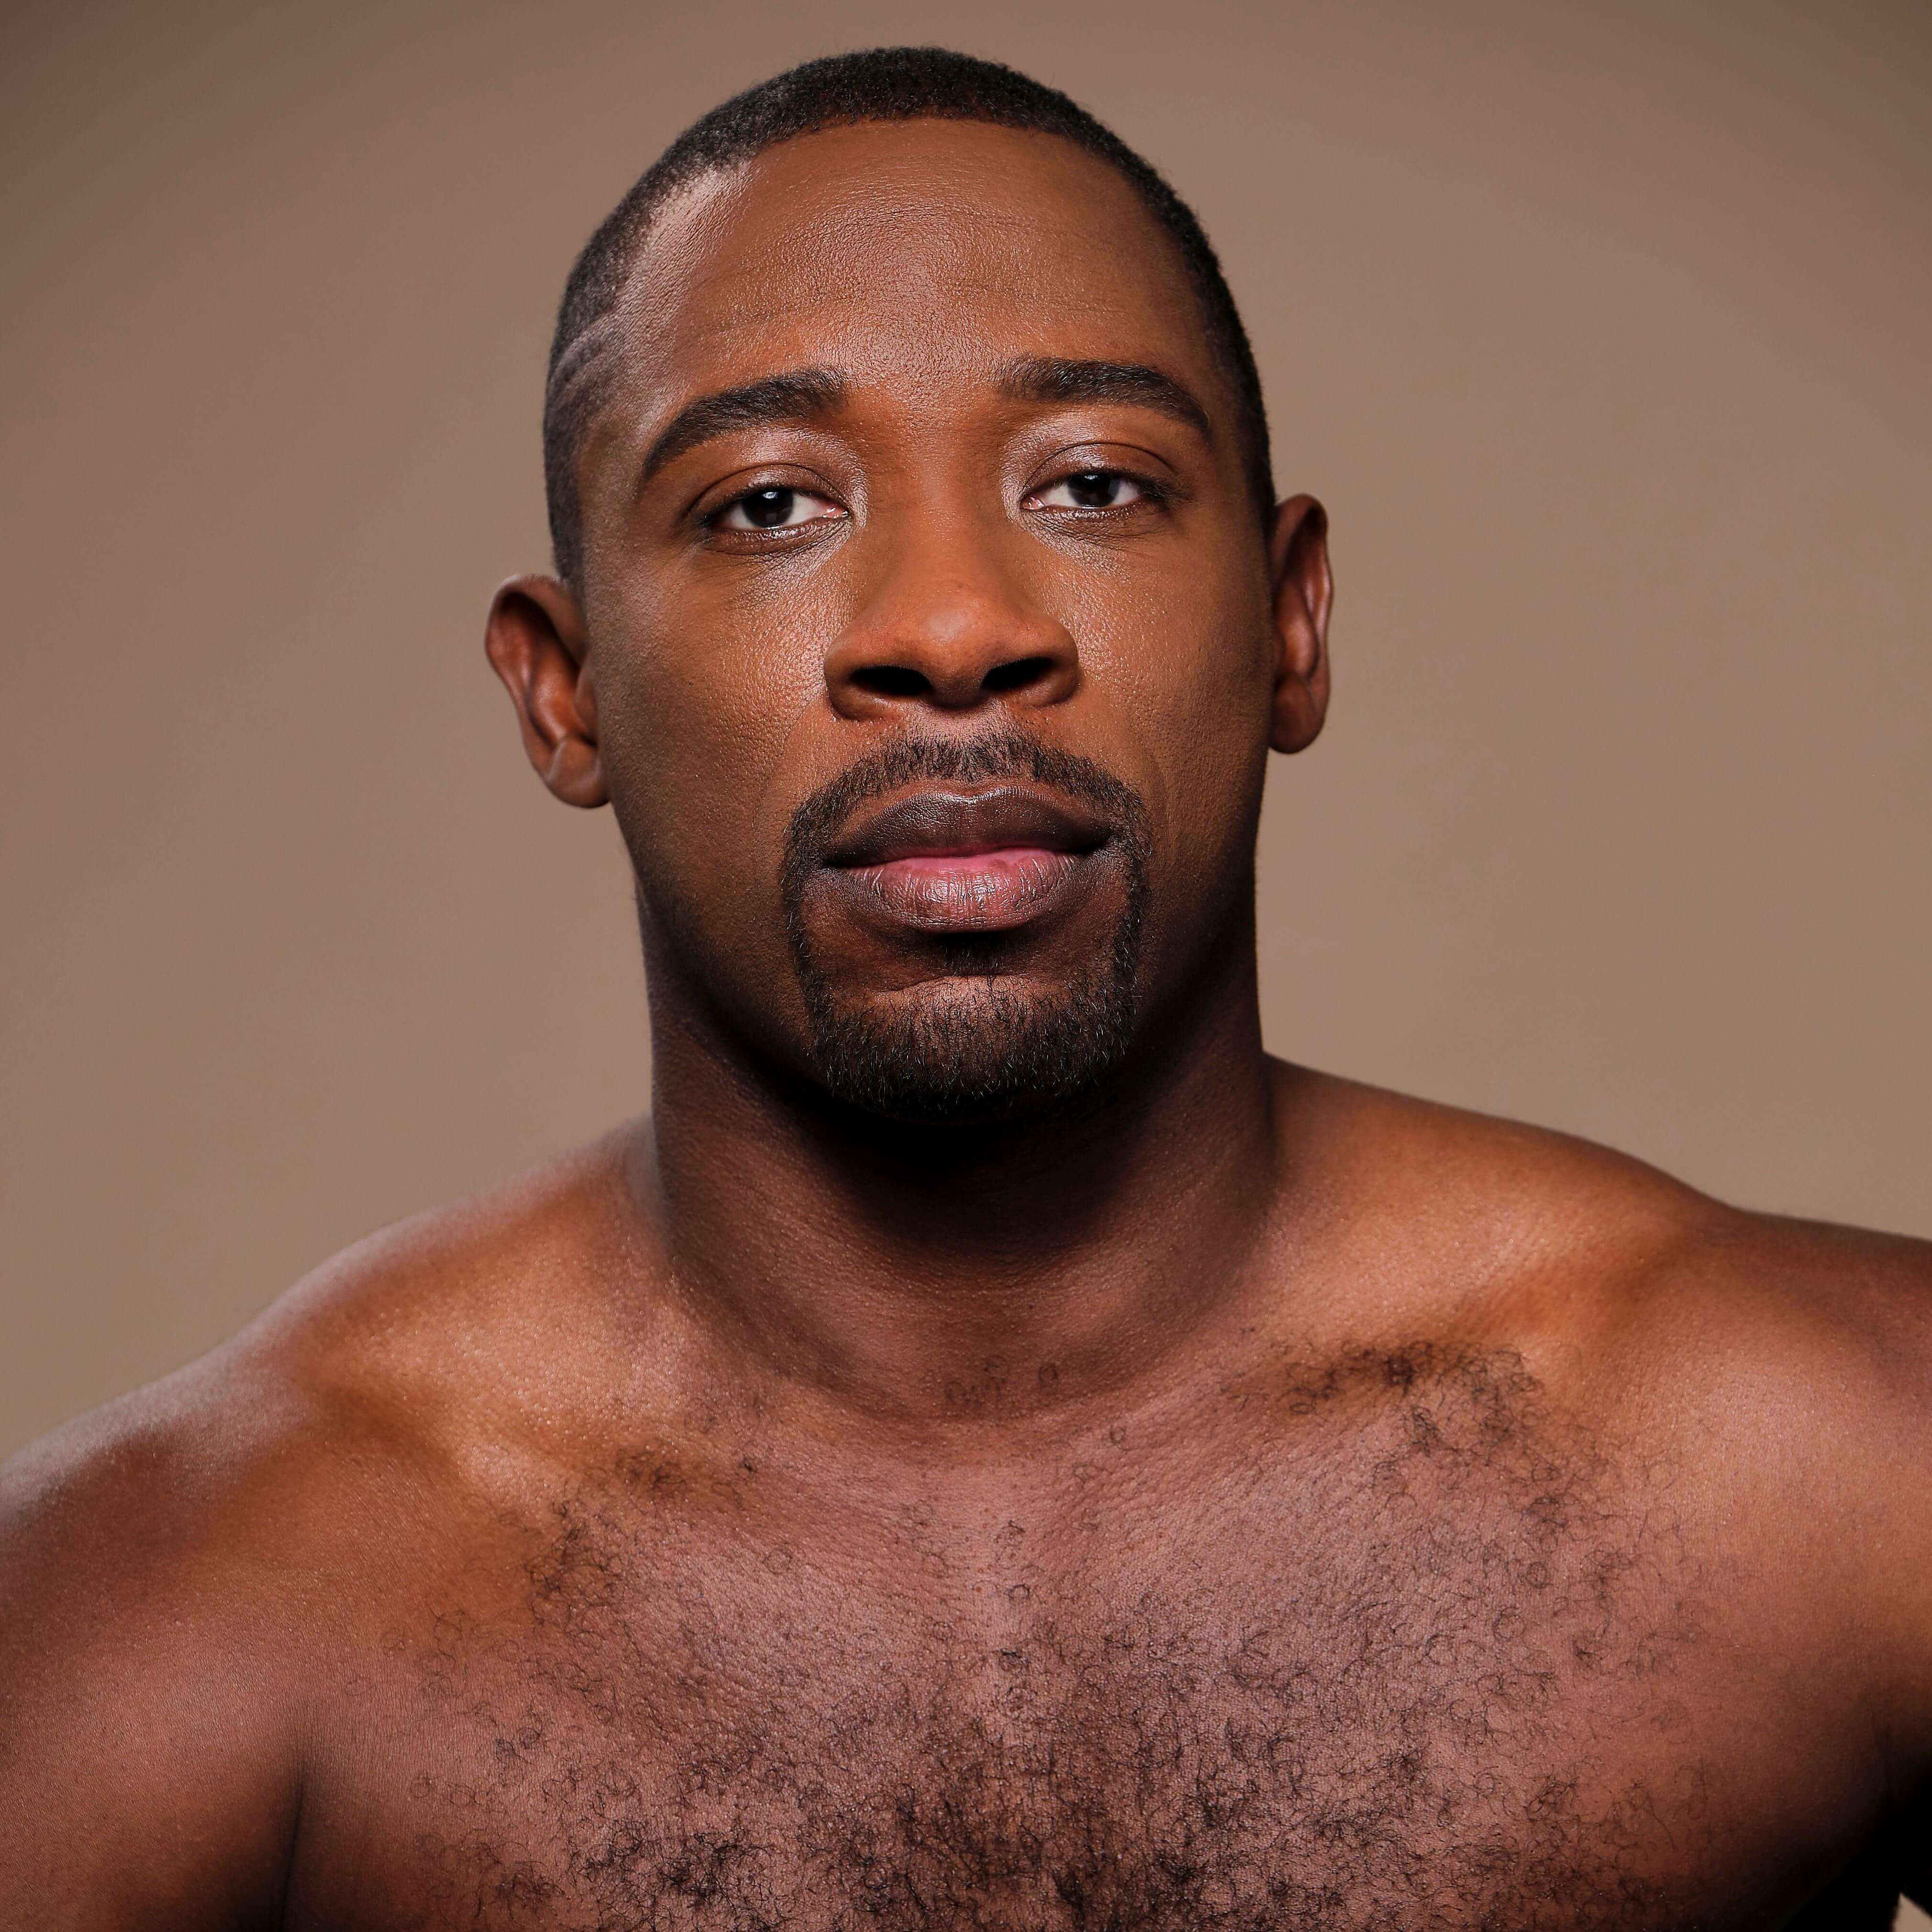 Image Description: Iquail, a Black man with a buzz cut and goatee, looks directly into the camera. He is bare-chested, set against a light brown background